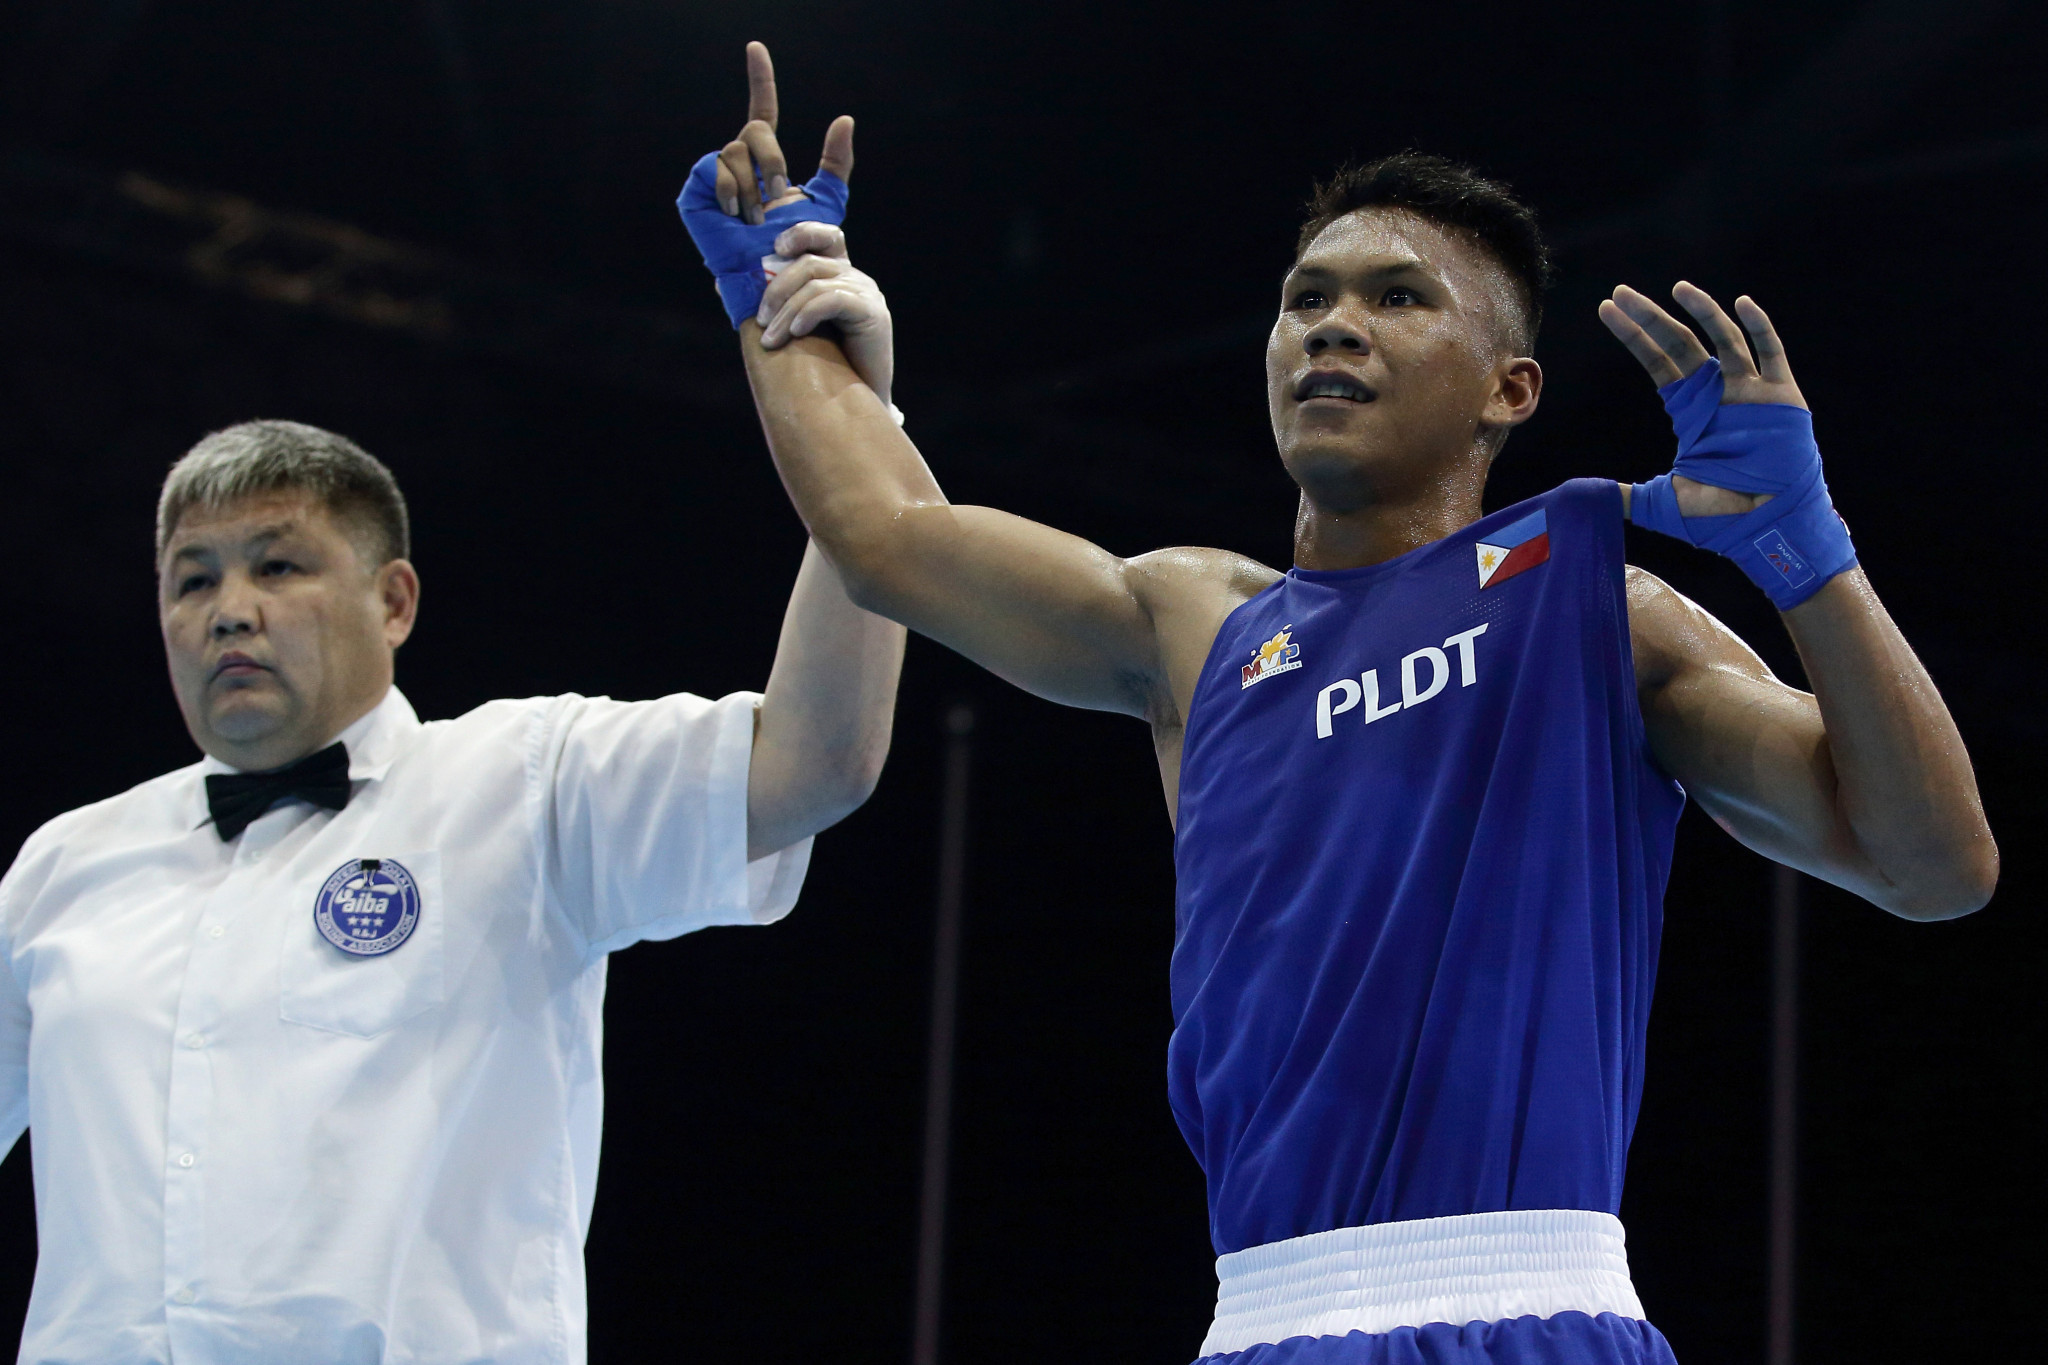 Boxer Eumir Marcial will be a key medal hope for the Philippines at Tokyo 2020 ©Getty Images